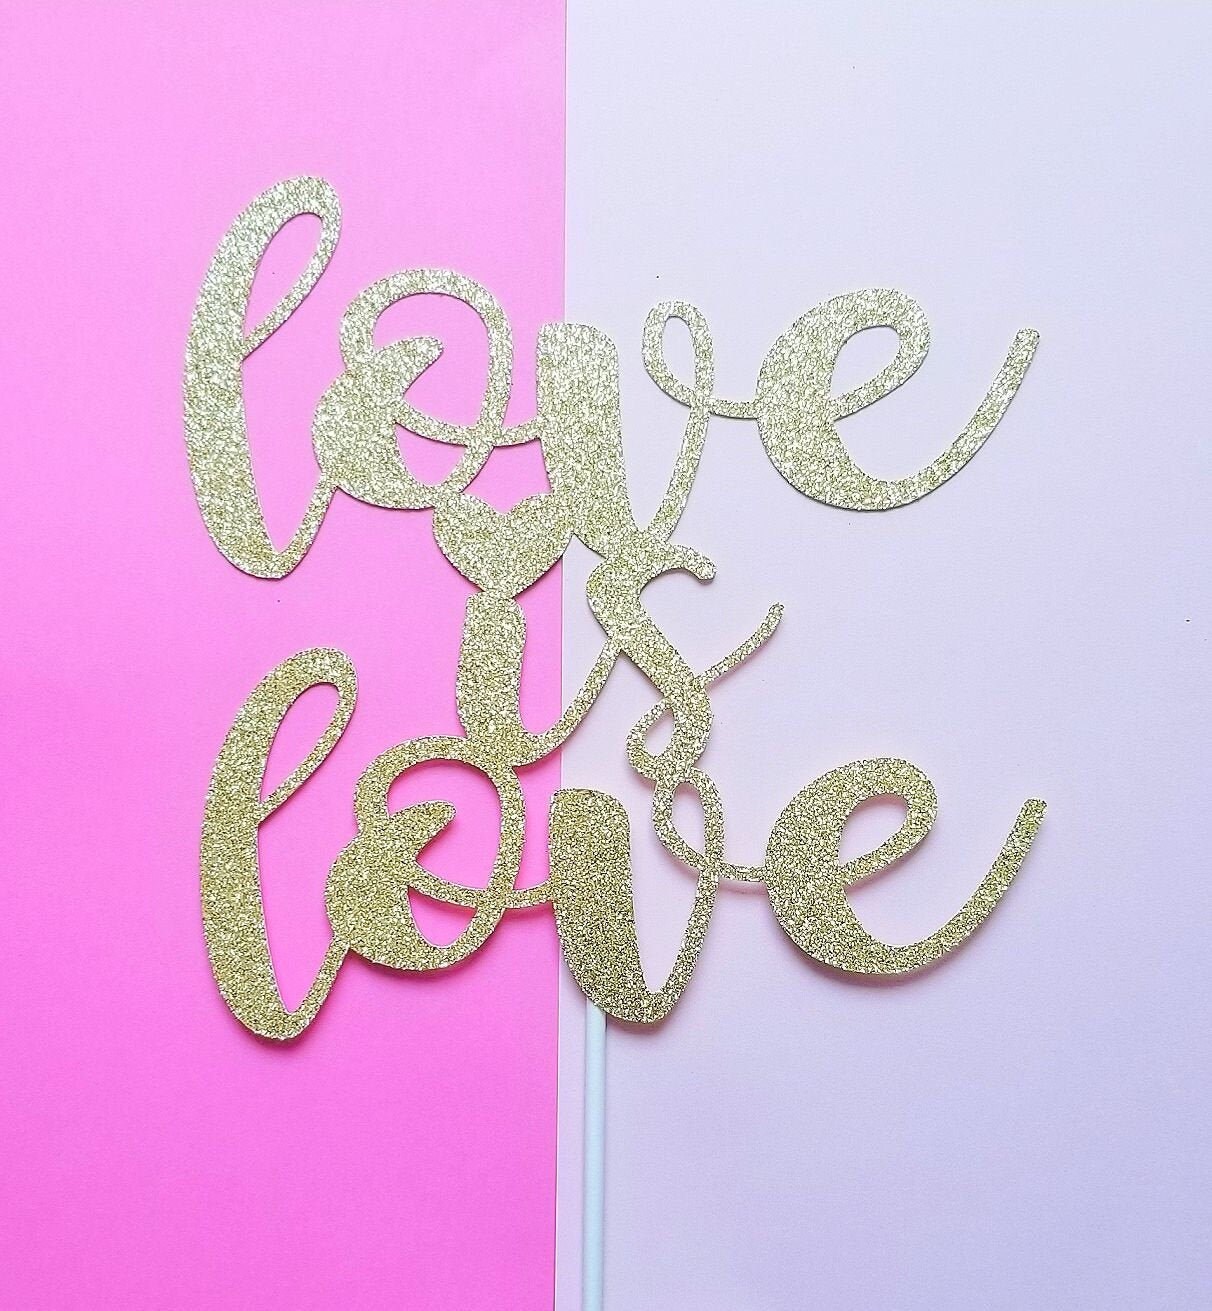 LOVE Cake Topper Sparkle Glitter Gold Wedding Decorating Engagement Party